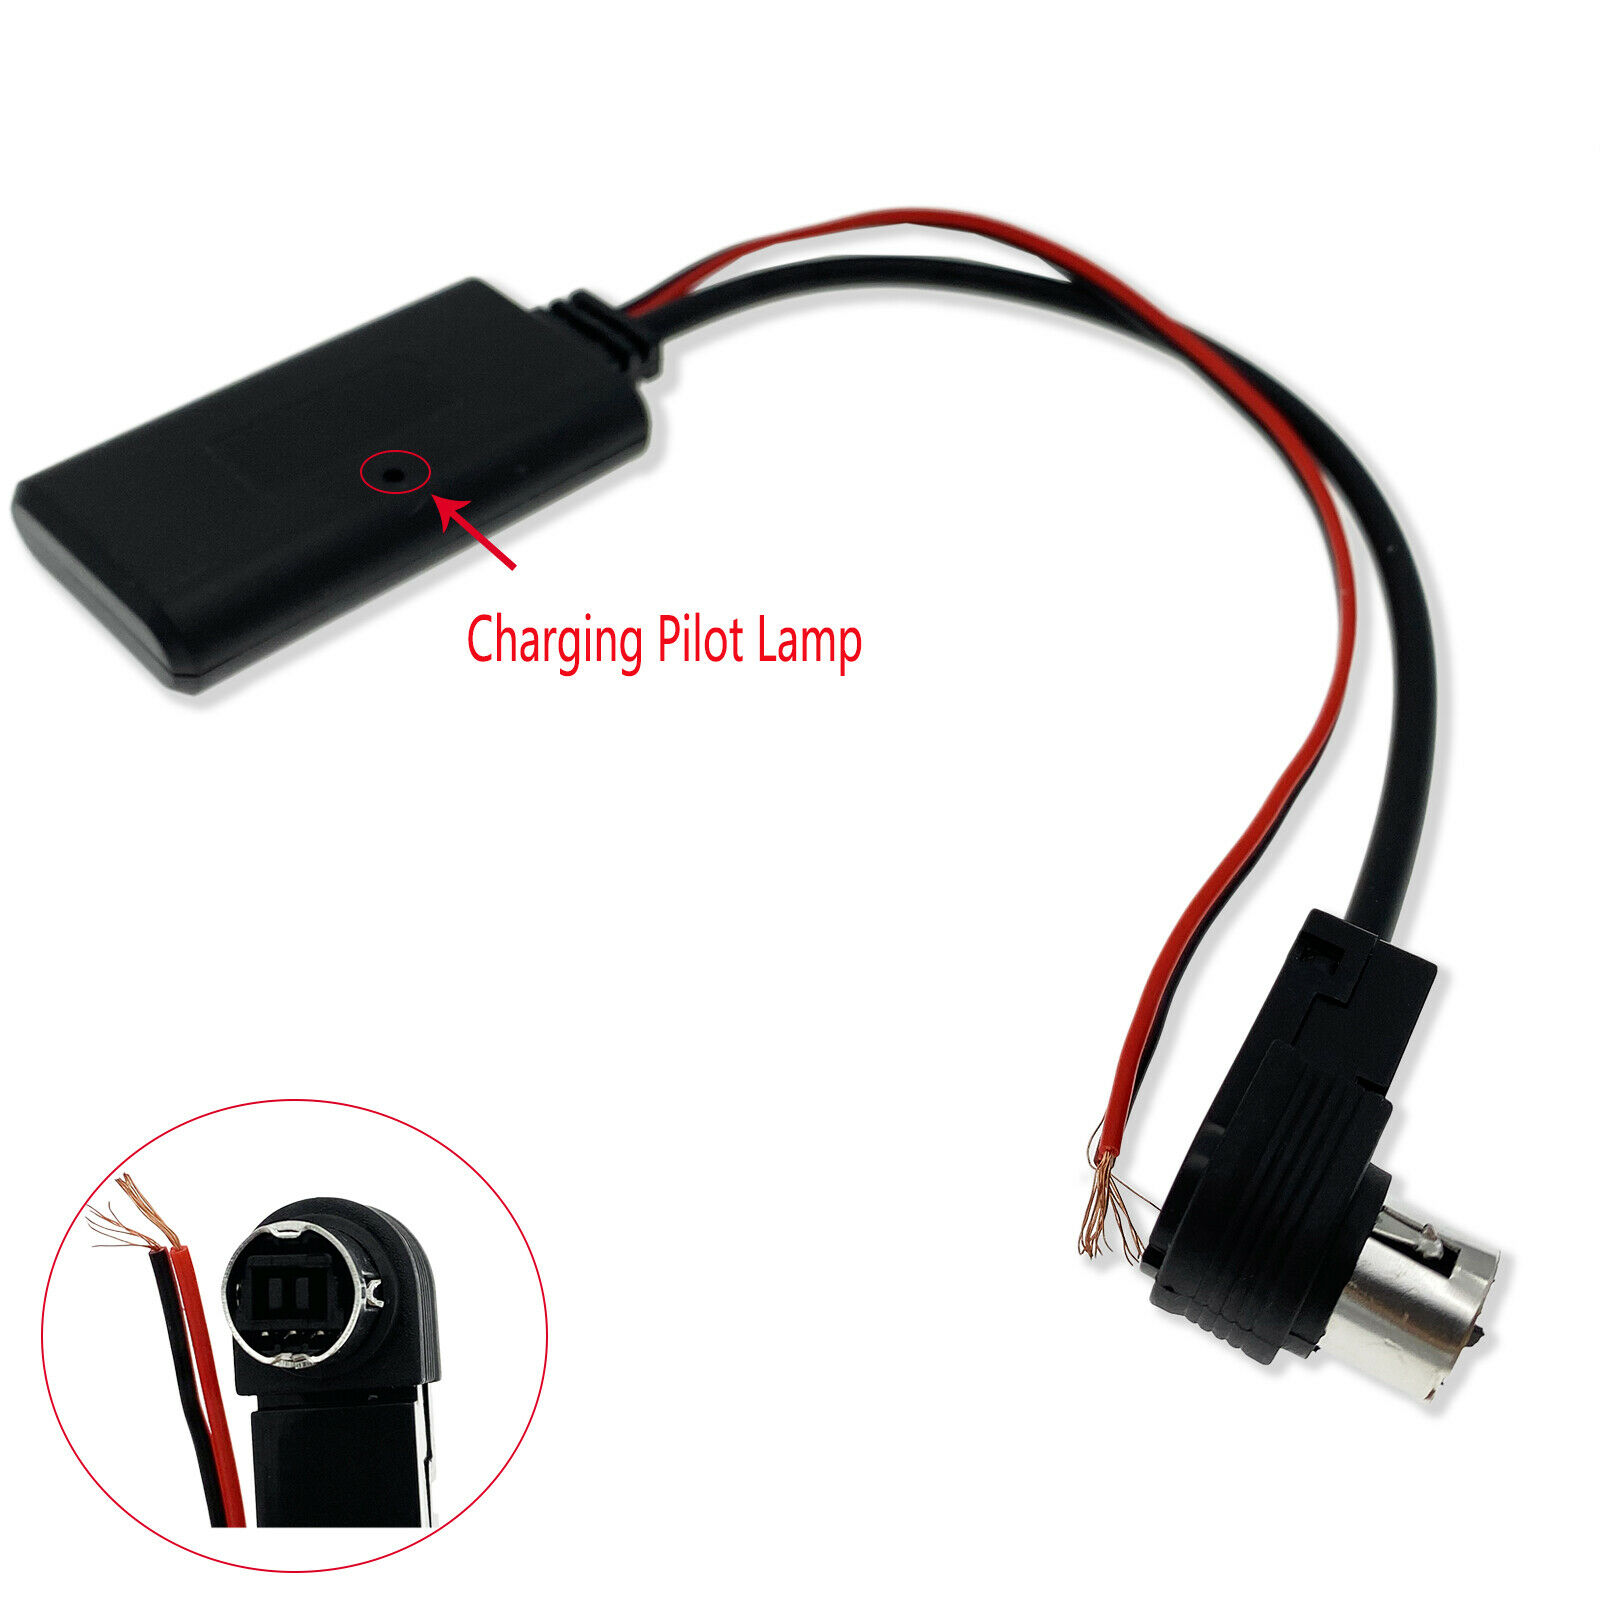 New For JVC KS-U5t, KS-U58, PD100, U57, U29 Bluetooth Aux Adapter Cable - image 2 of 4